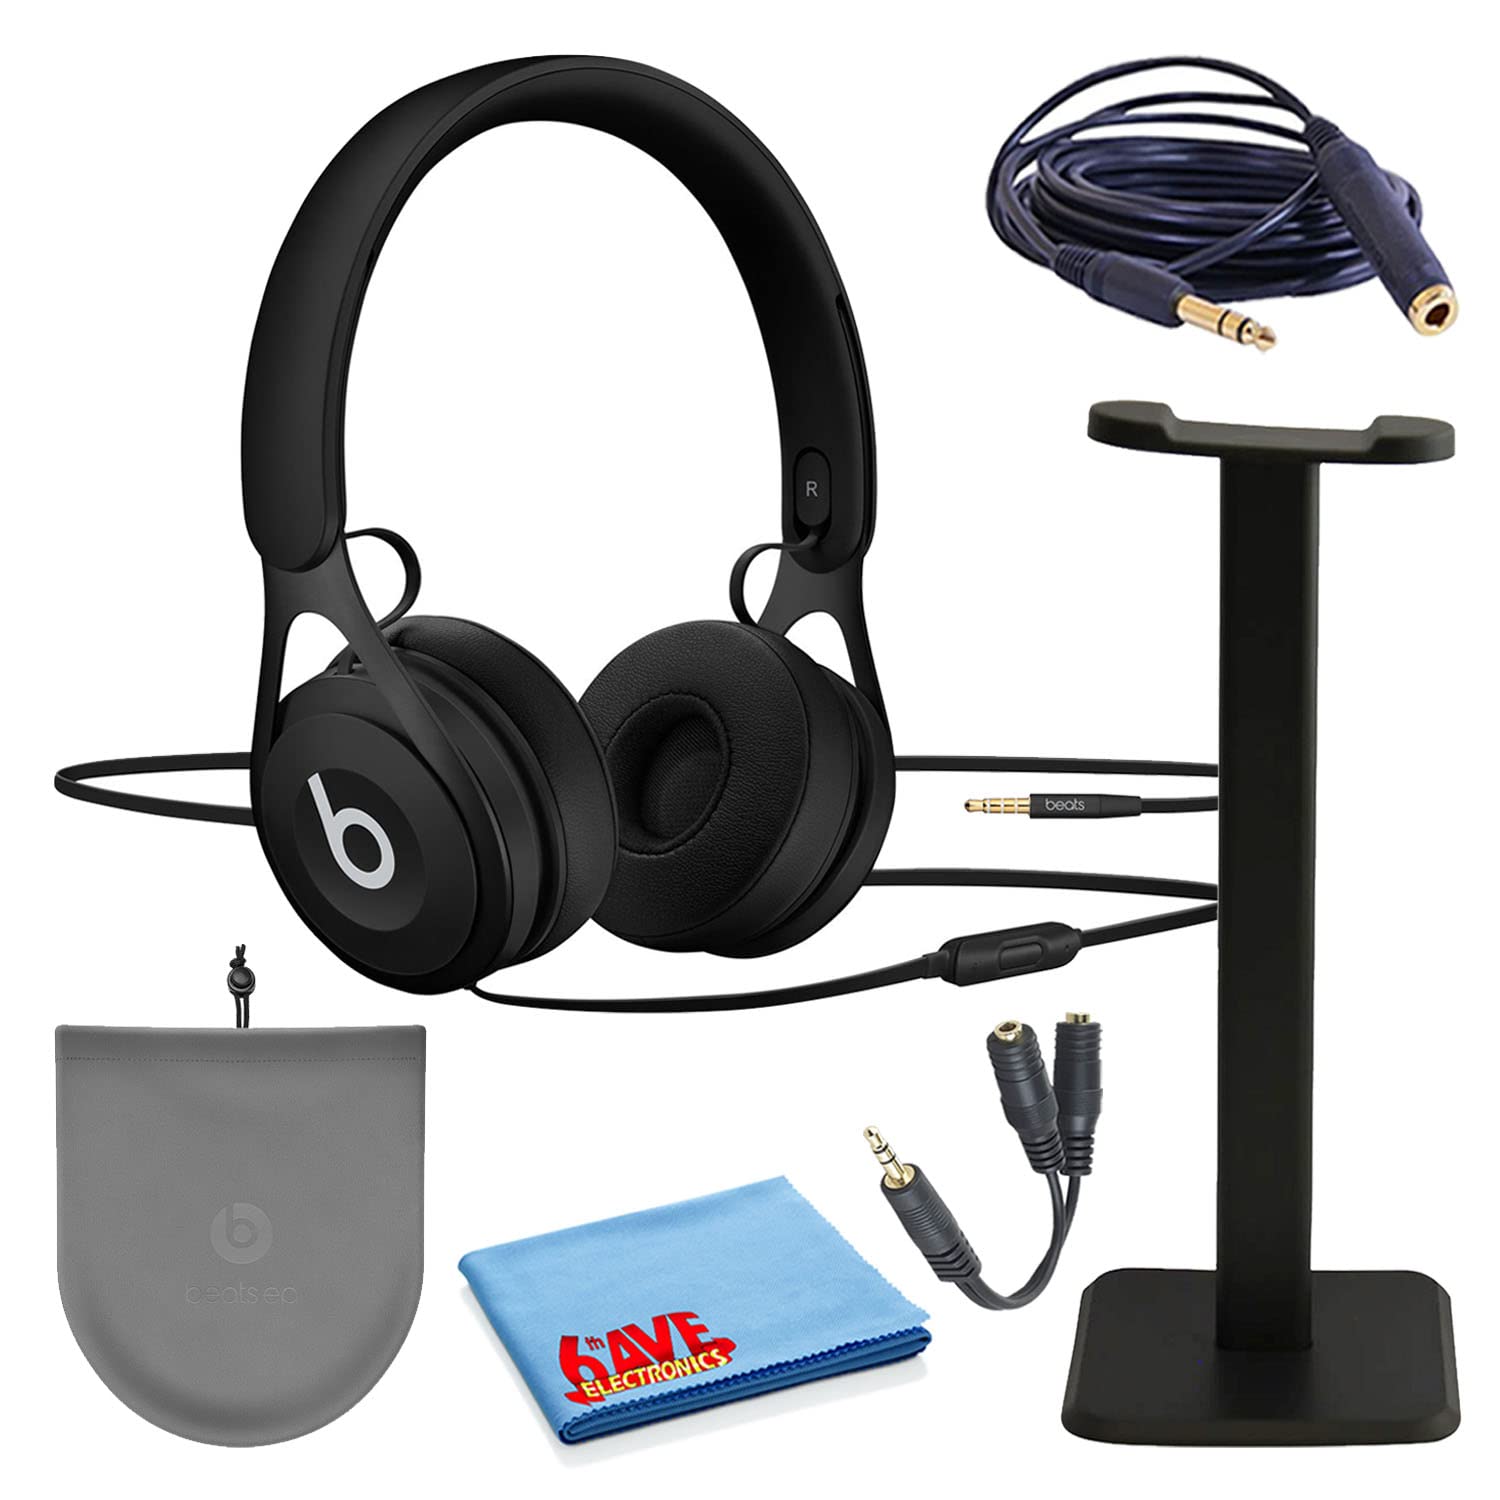 Beats EP On-Ear Wired Headphones - Black (ML992LL/A) Bundle with Headphone Stand + Extension Cable + Headphone Splitter + More